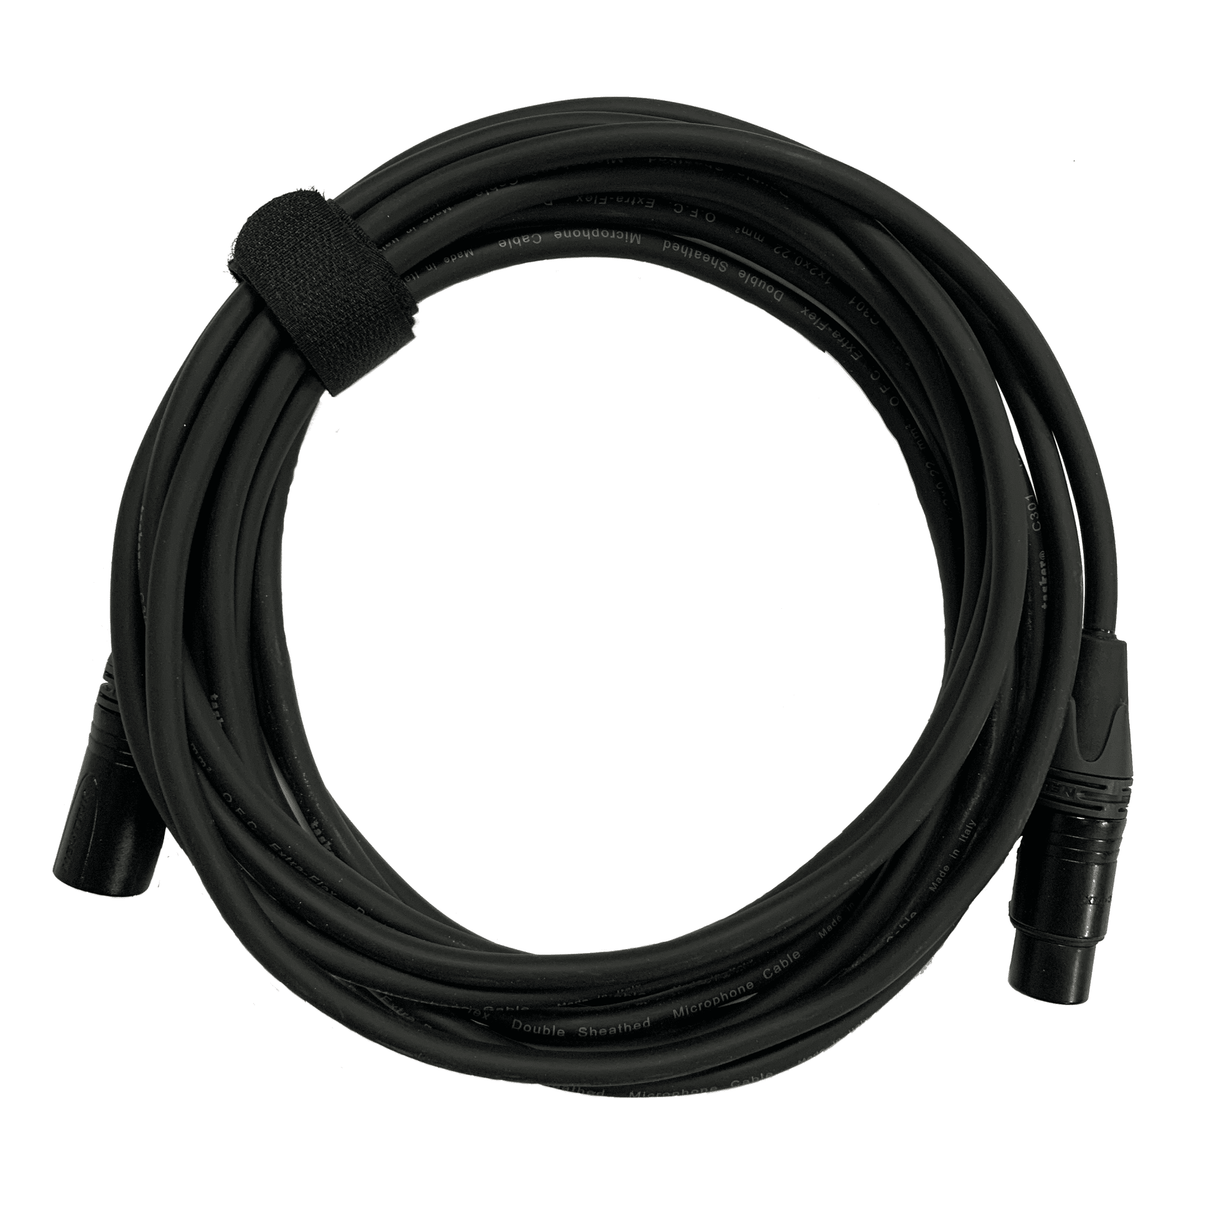 Rough Cable's XLR Cable A+ kwaliteit | 7,5 Meter